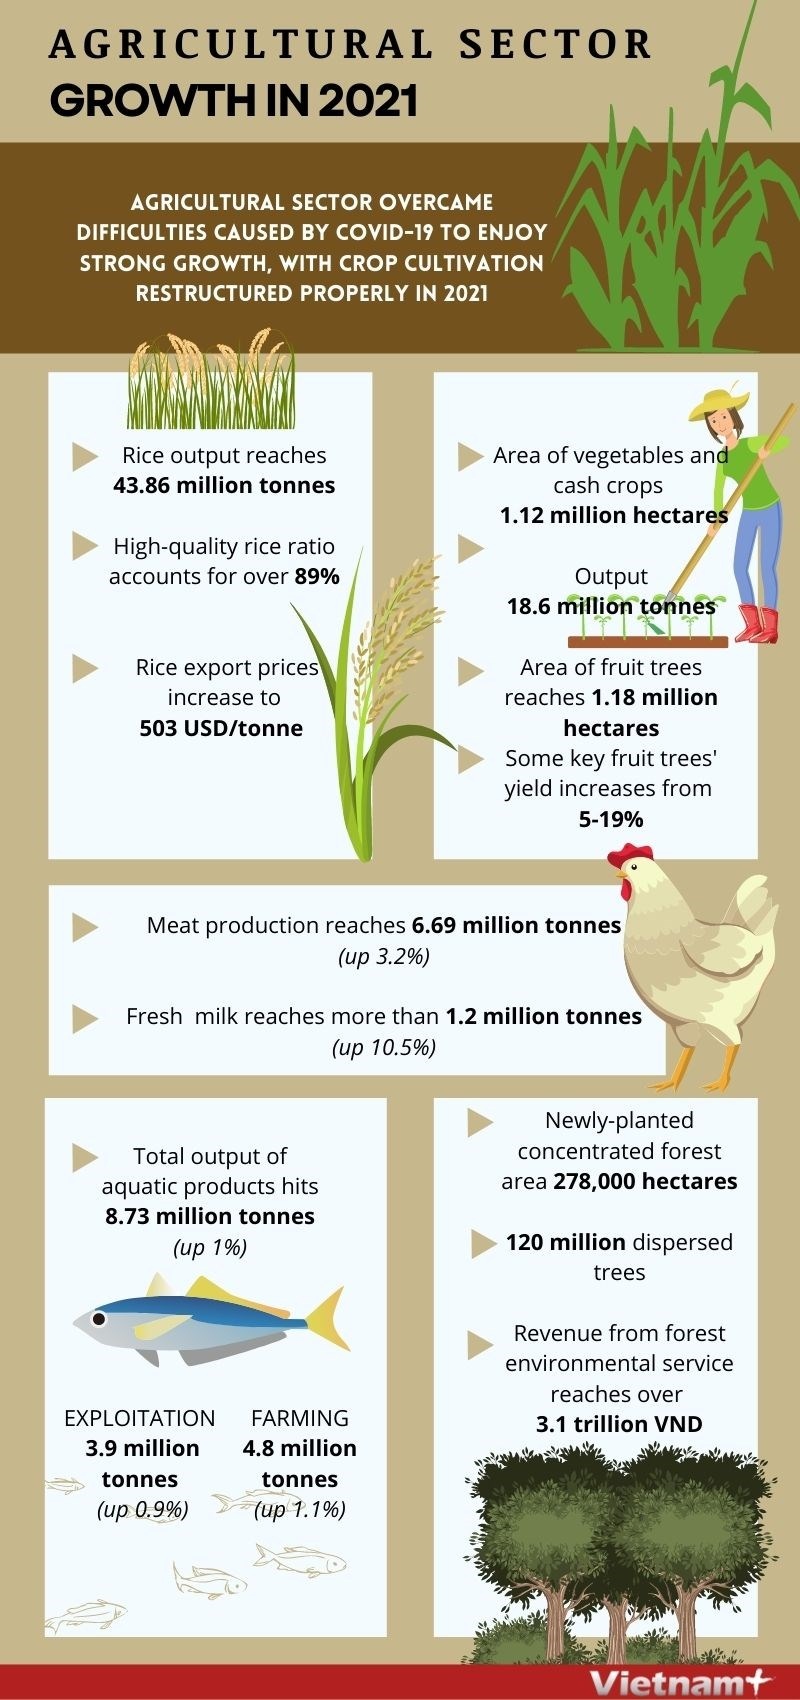 Agriculture sector's growth in 2021